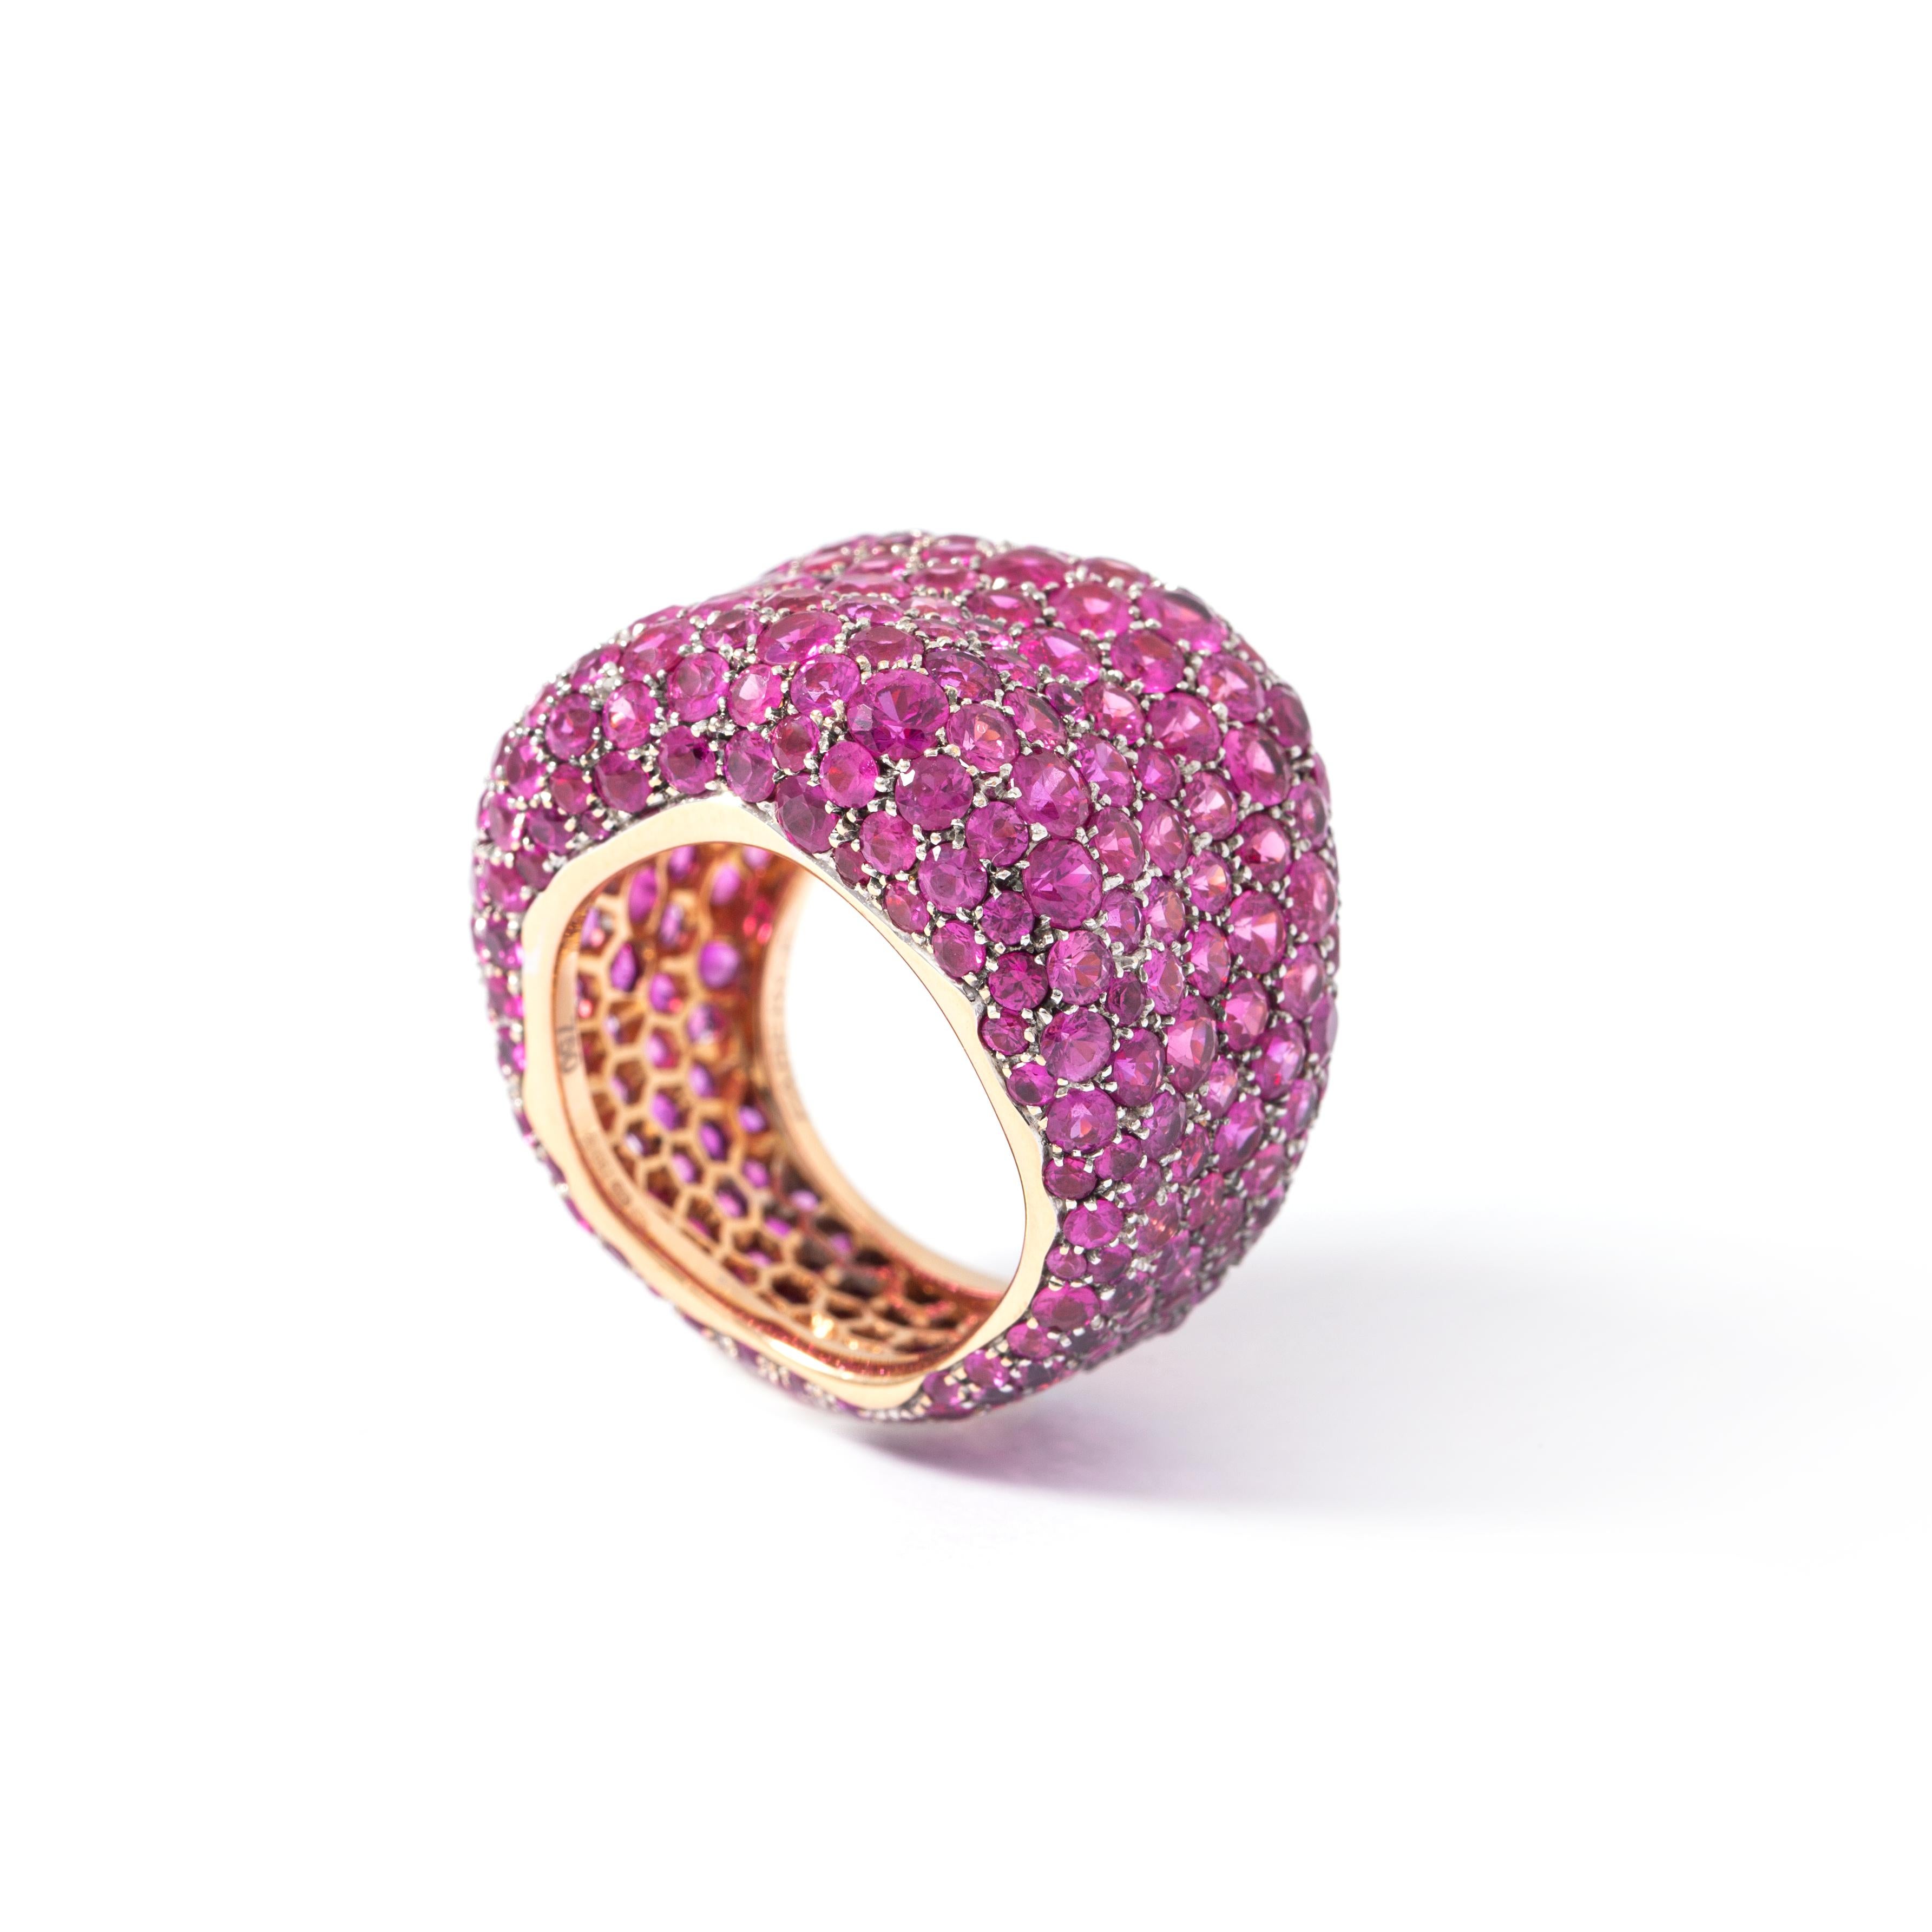 Women's or Men's Fabergé Pink Sapphire Ring